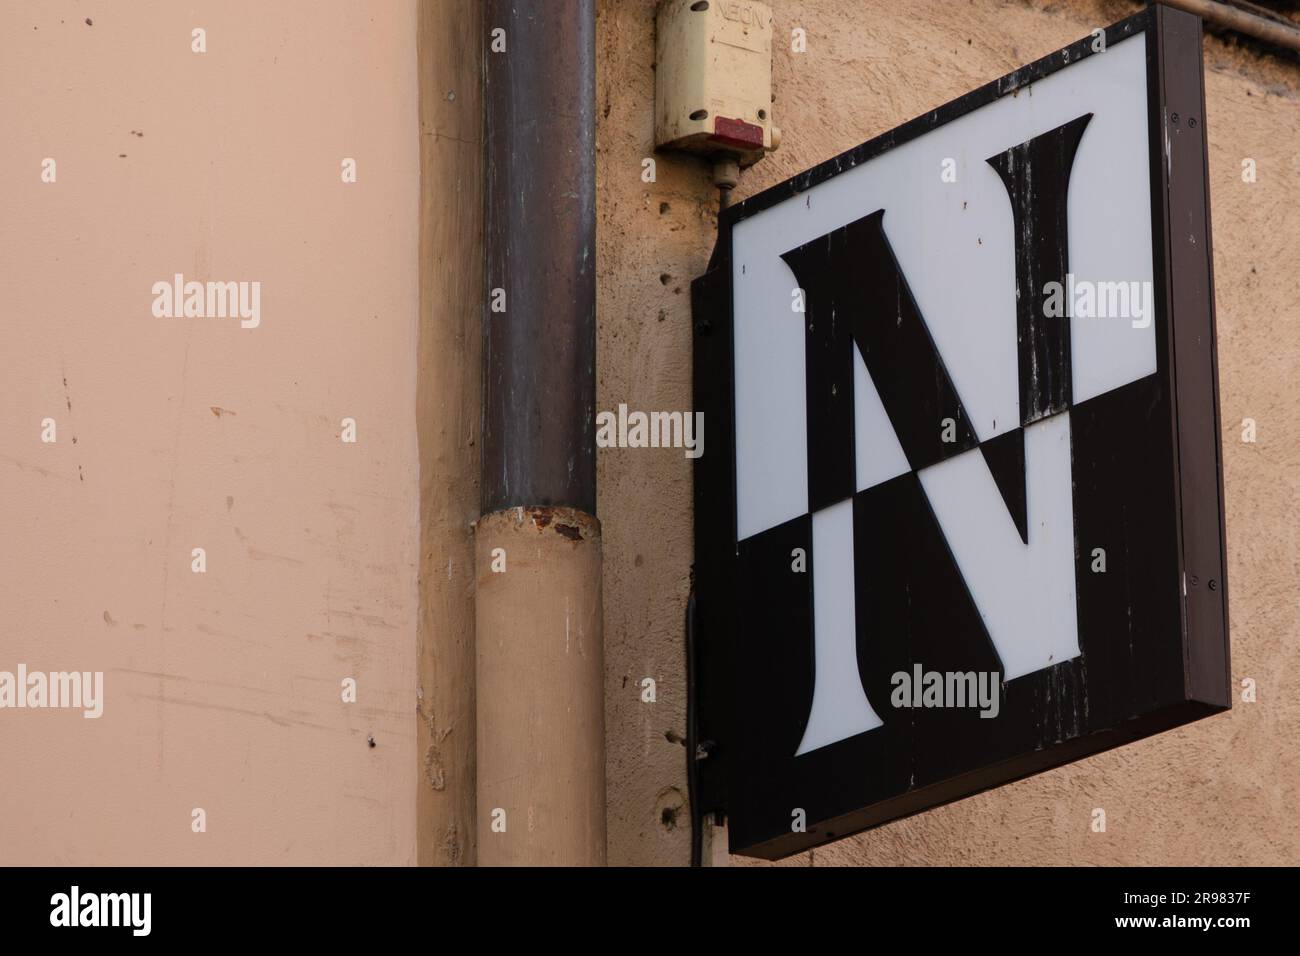 Bordeaux , Aquitaine France - 06 22 2023 : Napapijri brand sign and logo  text chain wall facade shop entrance for fashion clothing store Stock Photo  - Alamy